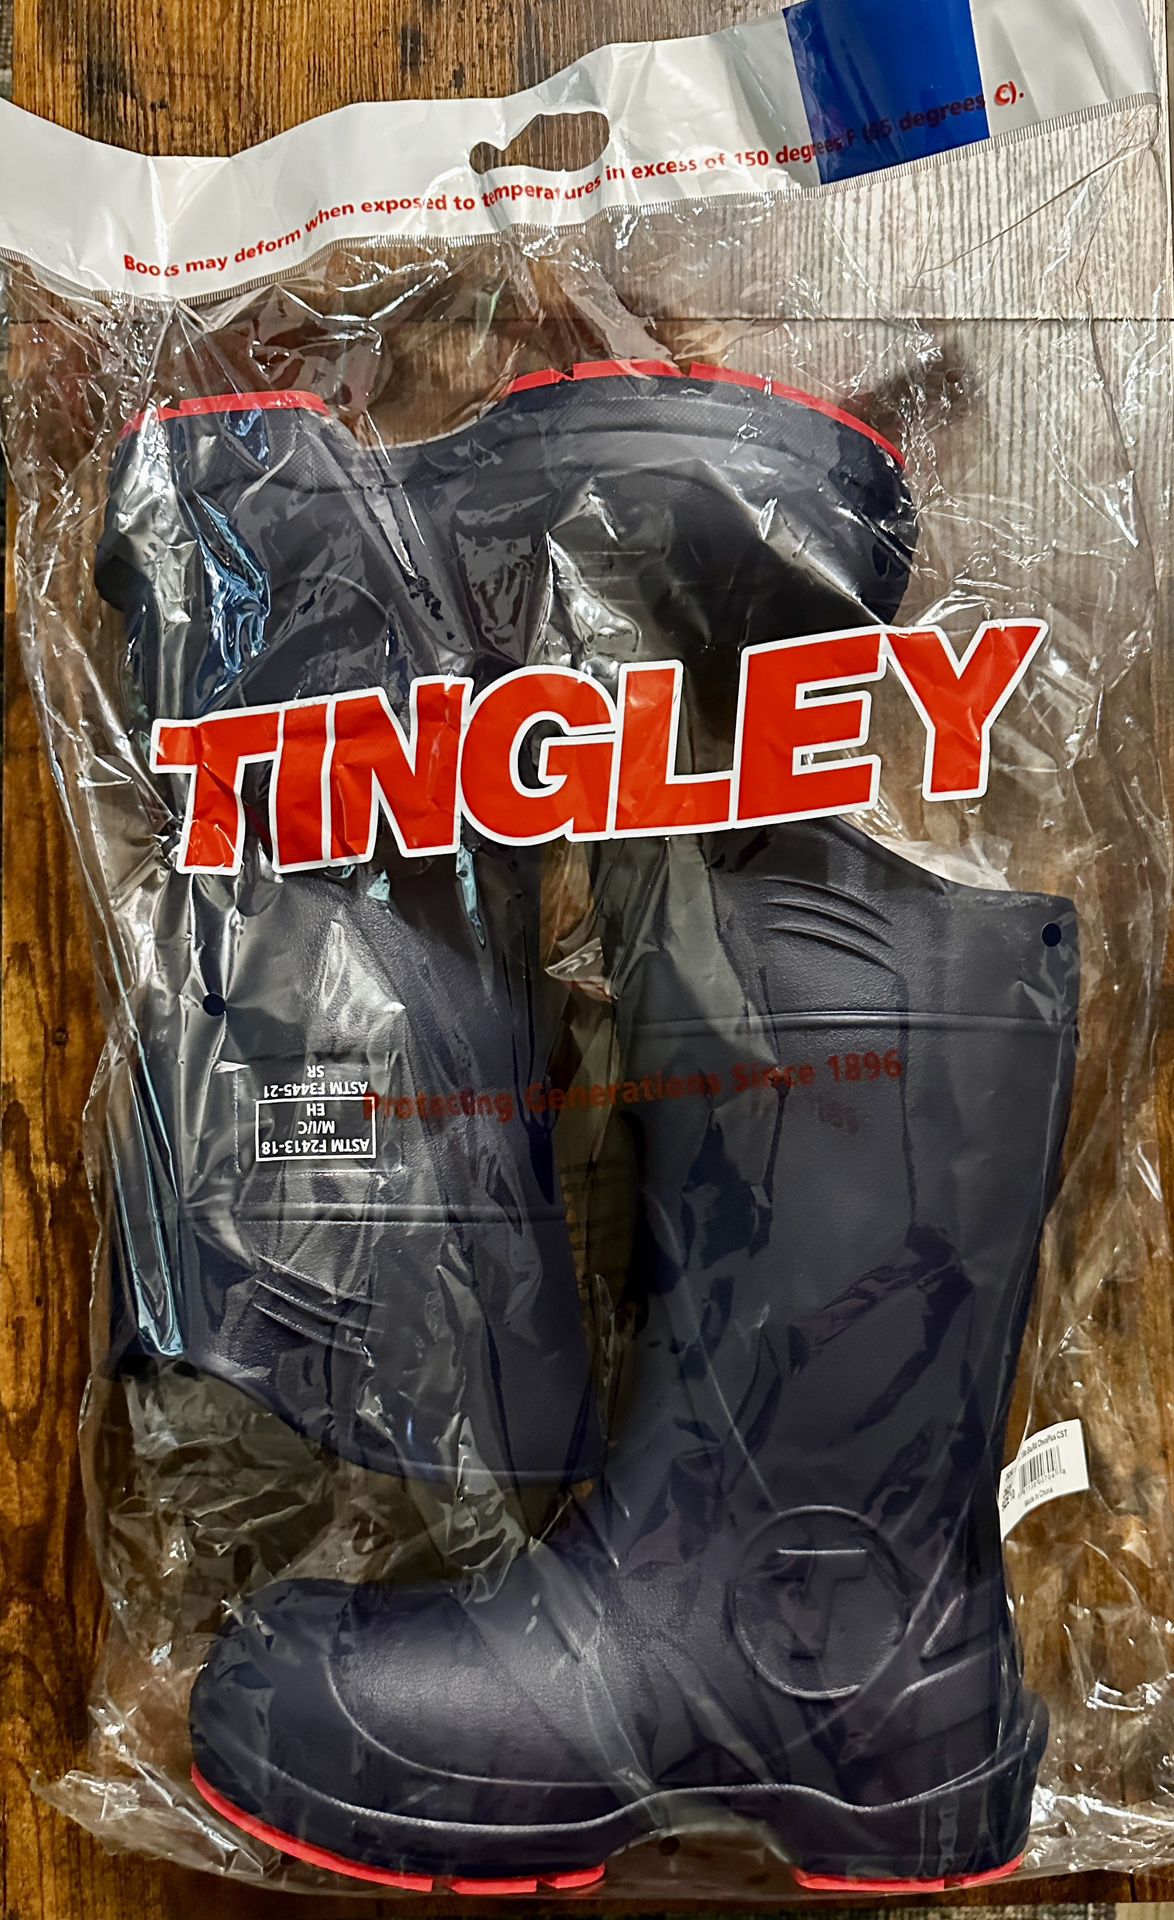 Tingley Rubber Boot